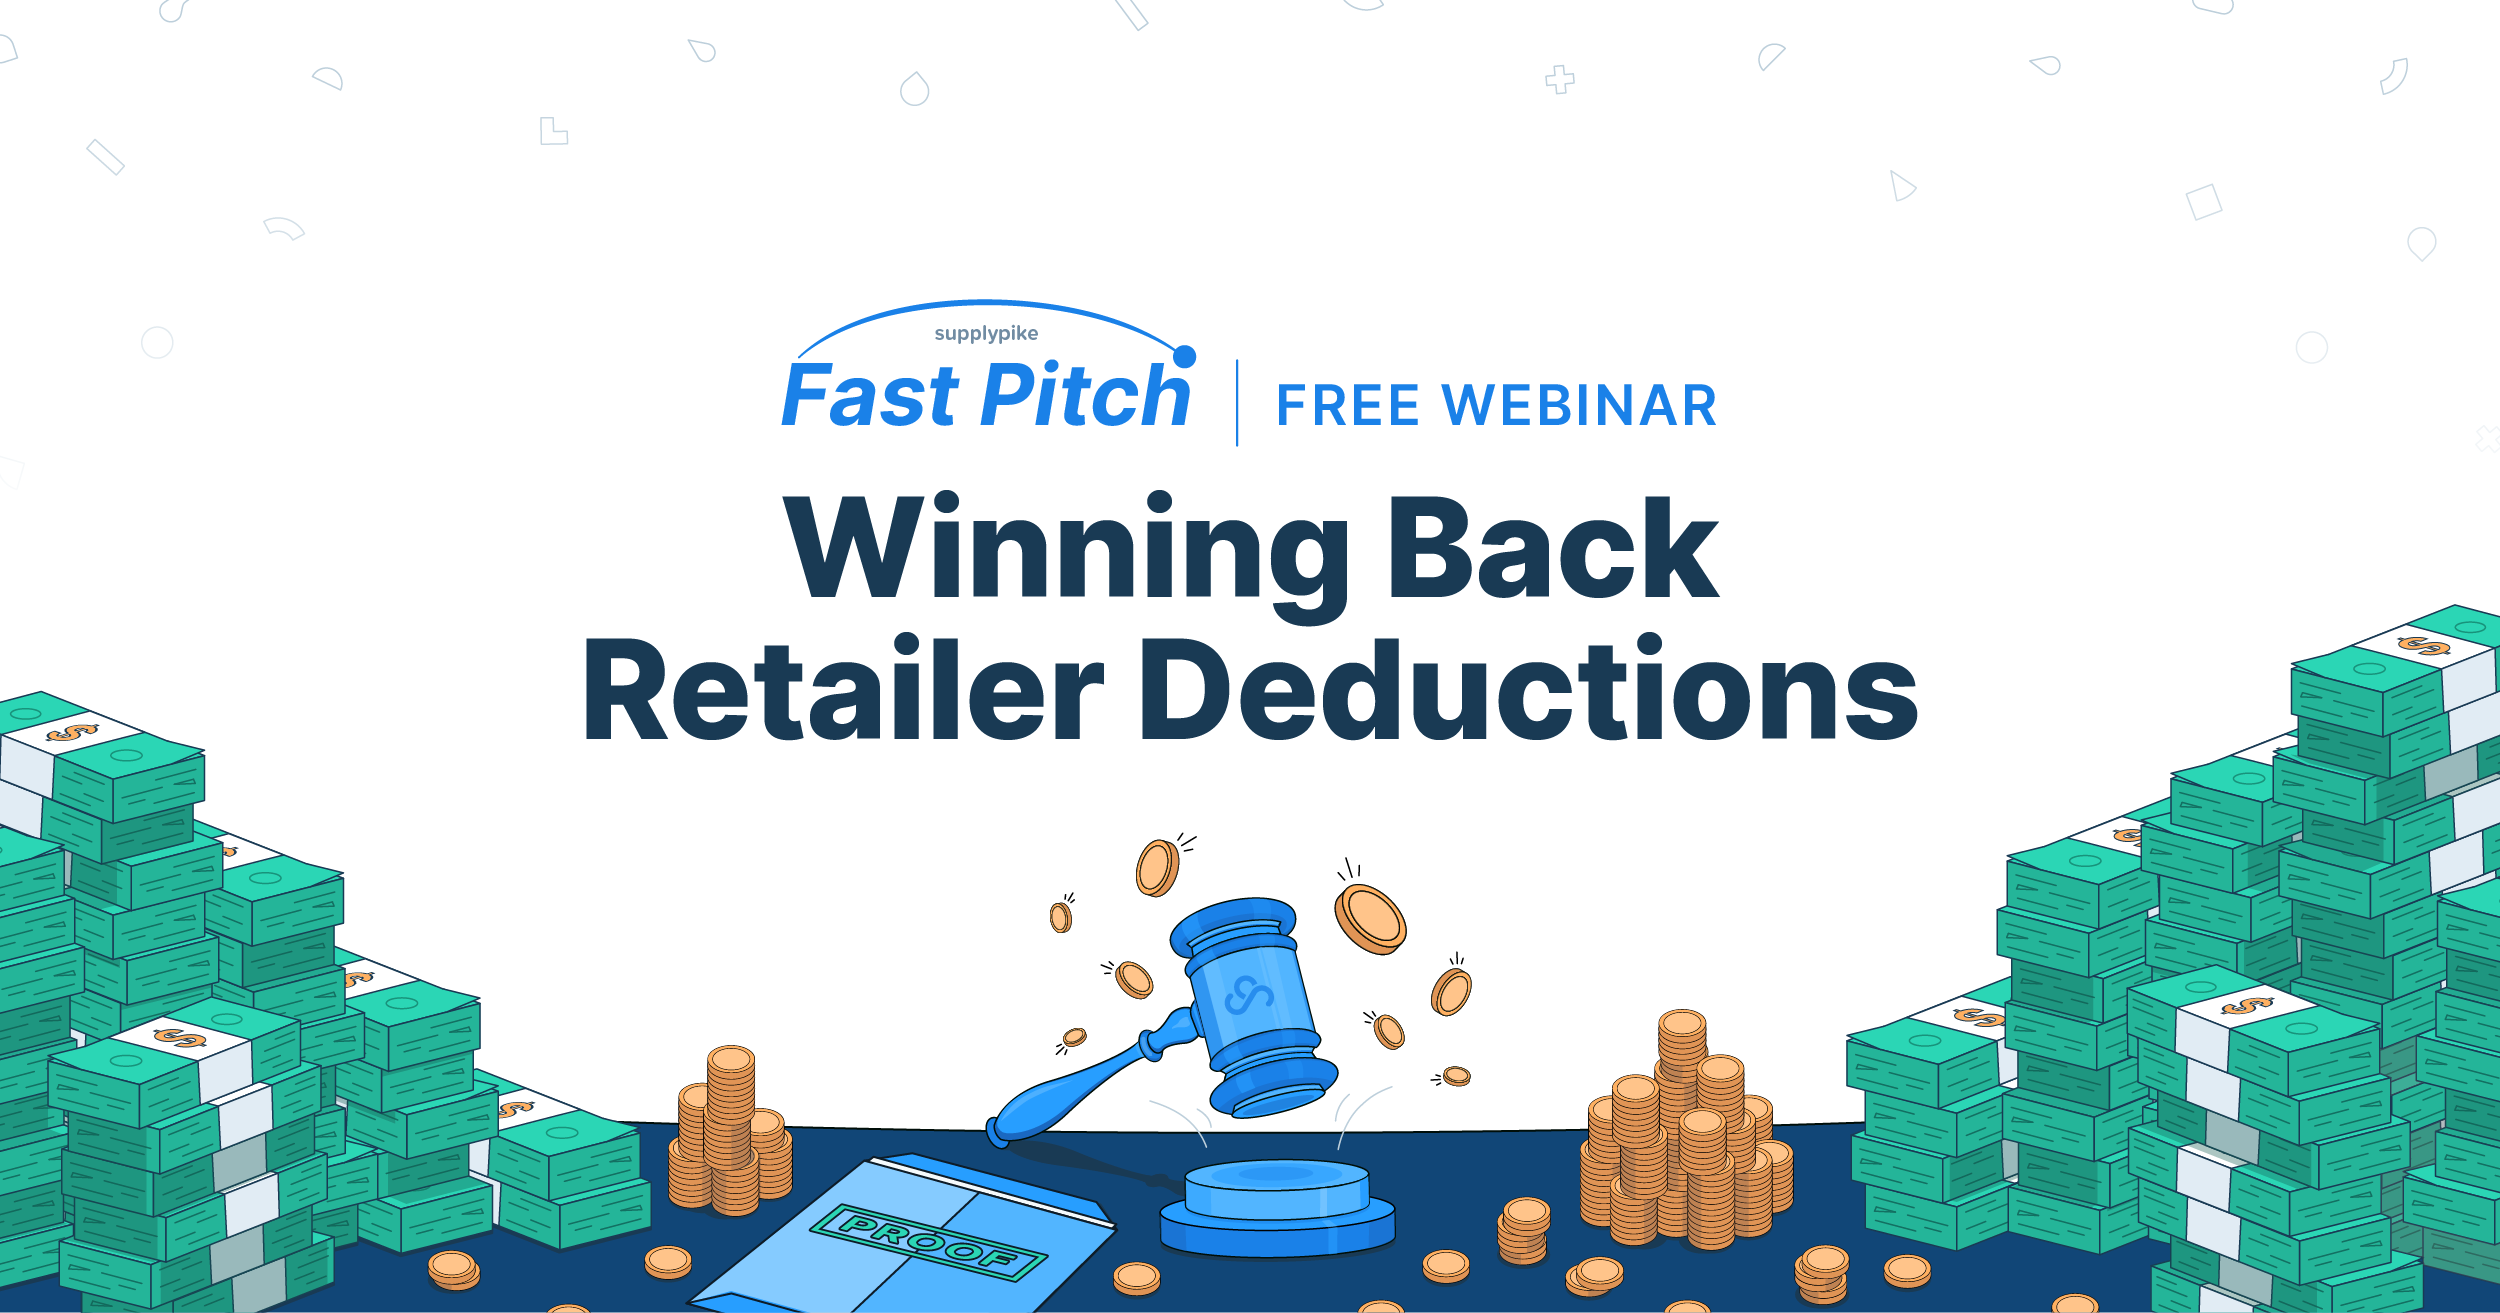 SupplyPike Fast Pitch: Winning Back Retailer Deductions